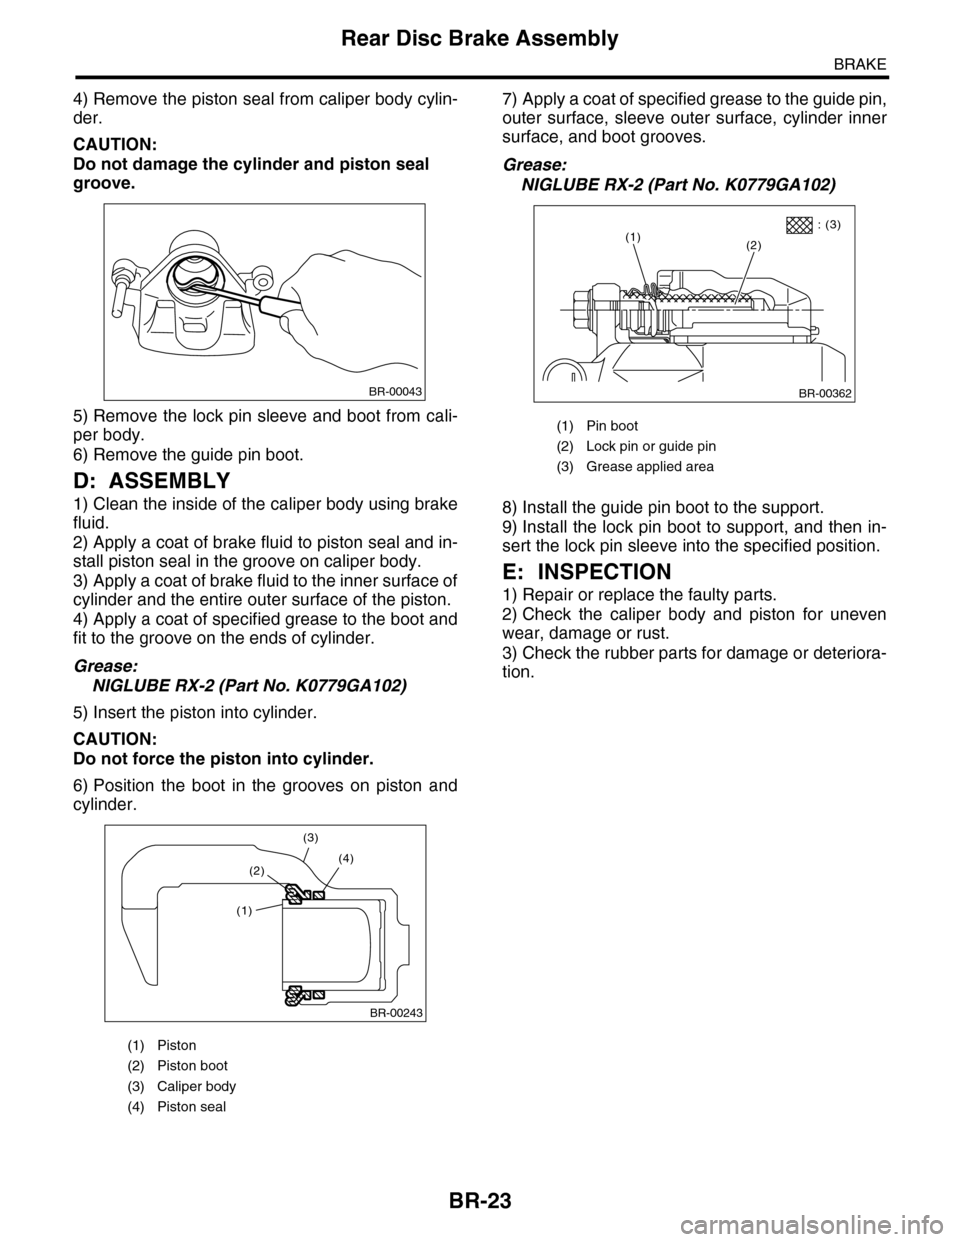 SUBARU TRIBECA 2009 1.G Service Workshop Manual BR-23
Rear Disc Brake Assembly
BRAKE
4) Remove the piston seal from caliper body cylin-
der.
CAUTION:
Do not damage the cylinder and piston seal 
groove.
5) Remove the lock pin sleeve and boot from ca